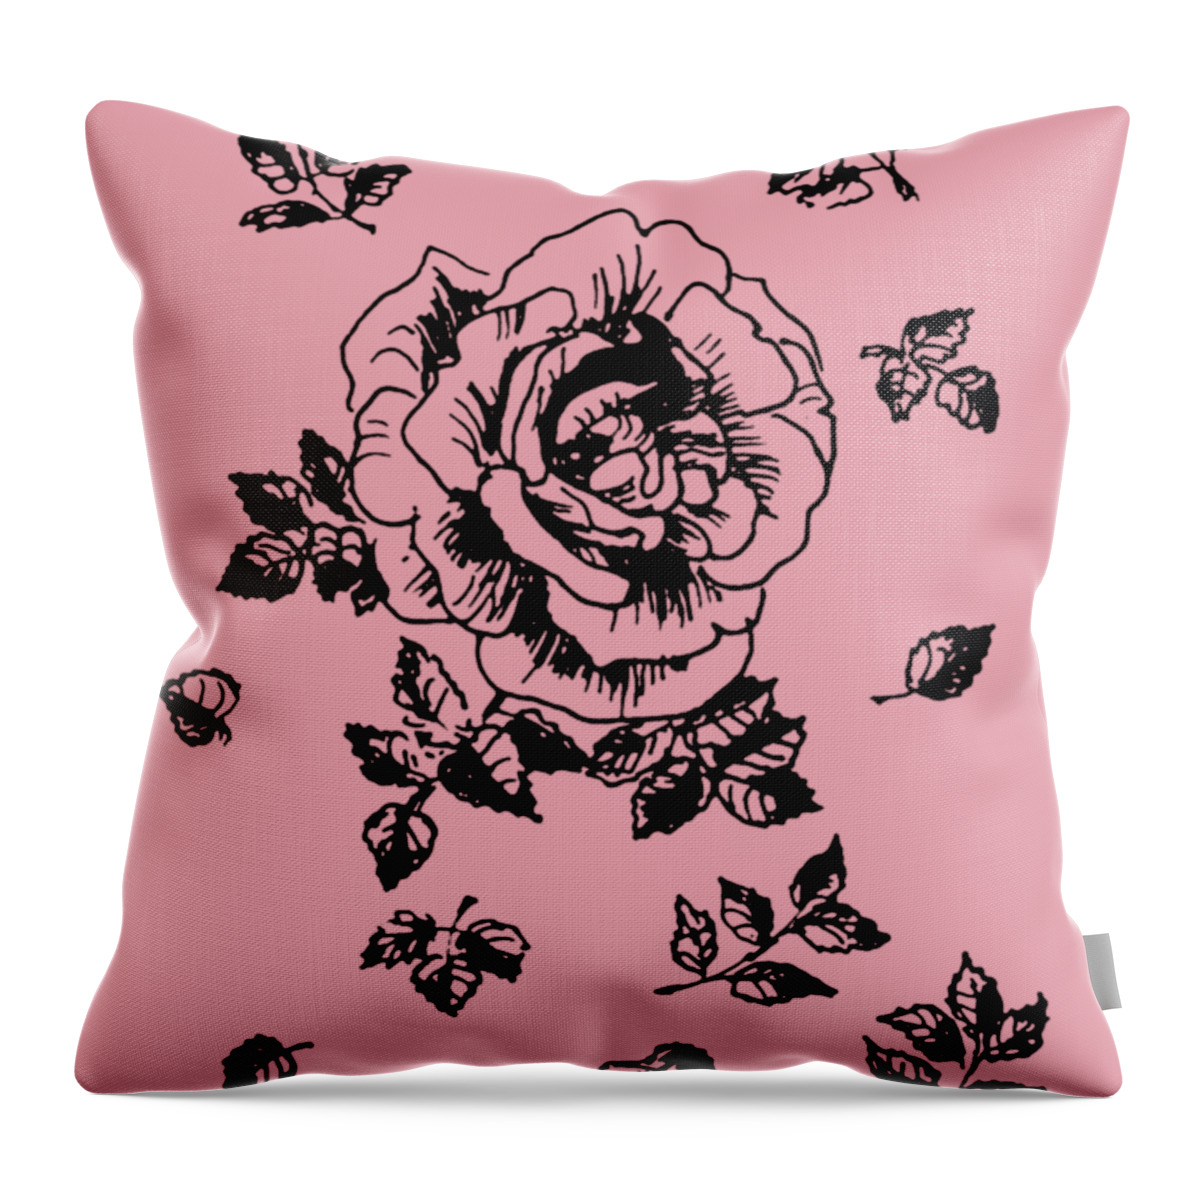 Rose Throw Pillow featuring the drawing Black Graphic Rose by Masha Batkova